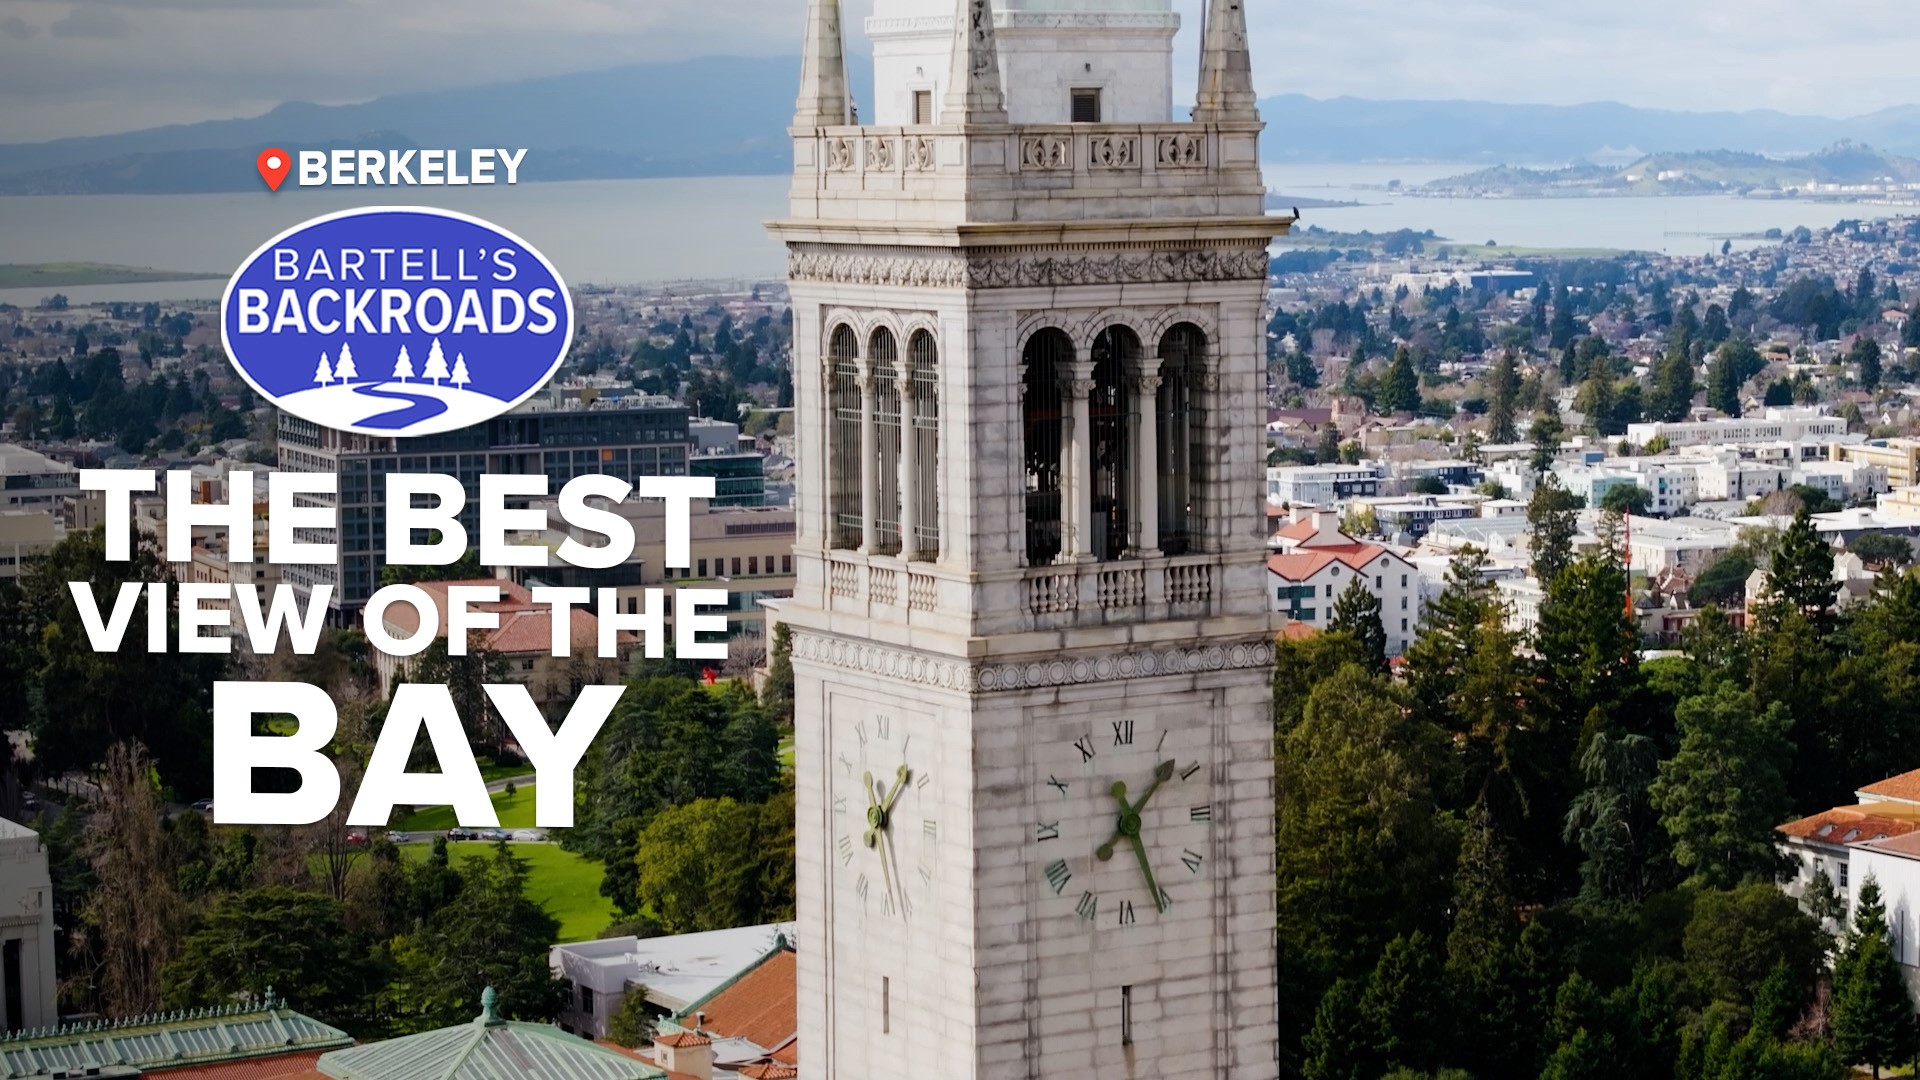 See the view from UC Berkeley's giant clock tower and listen to a free concert.